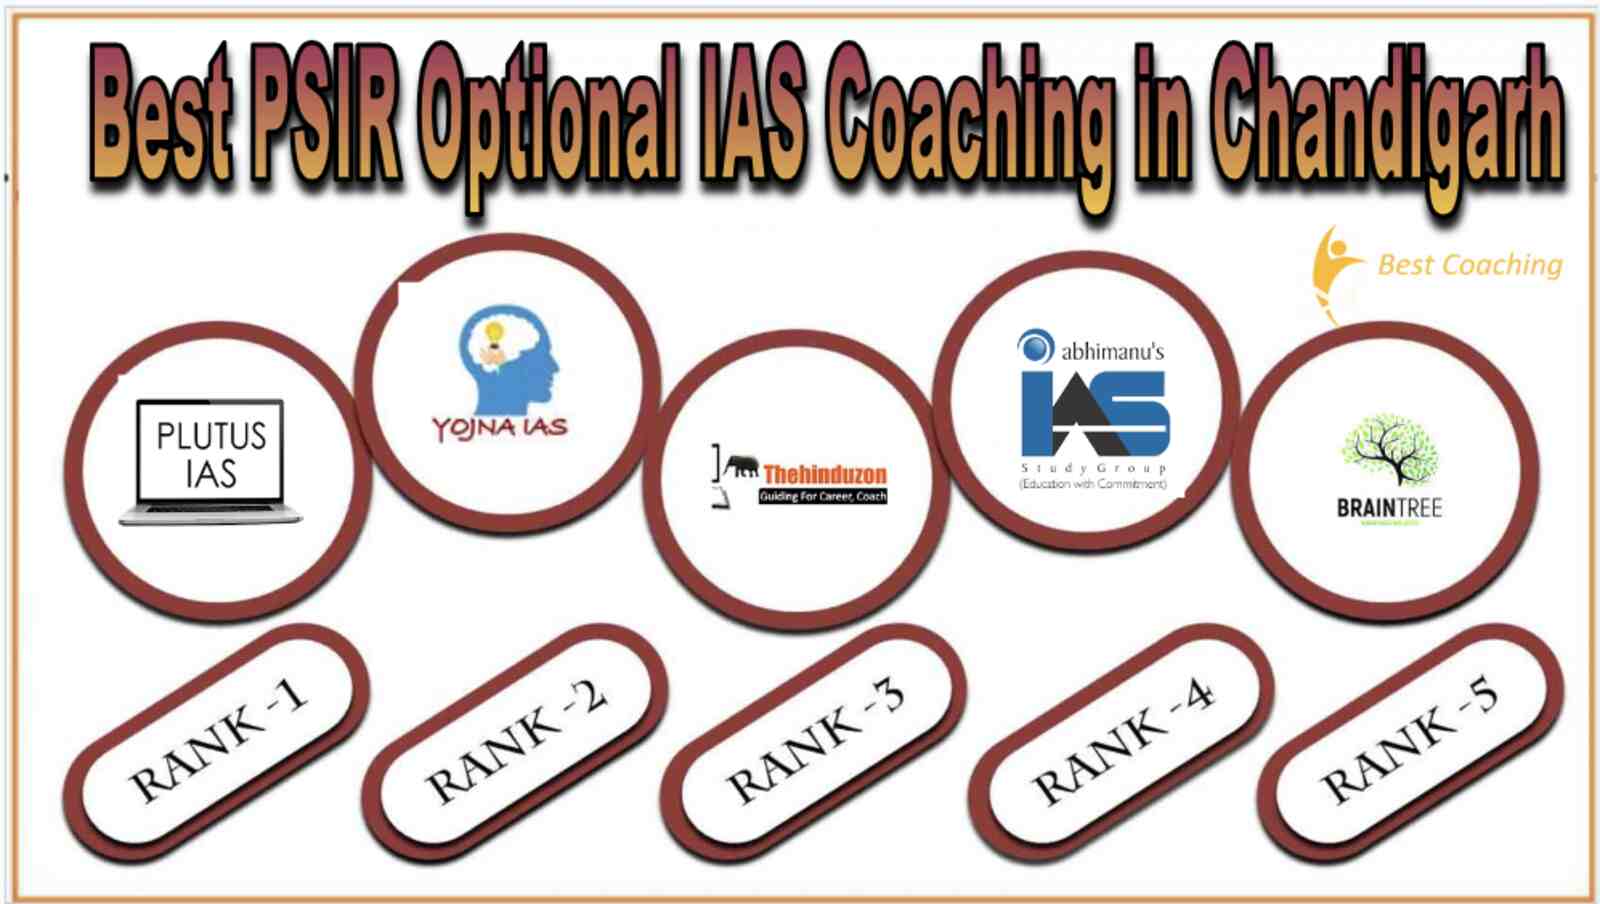 Best Geography Optional IAS Coaching in Chandigarh